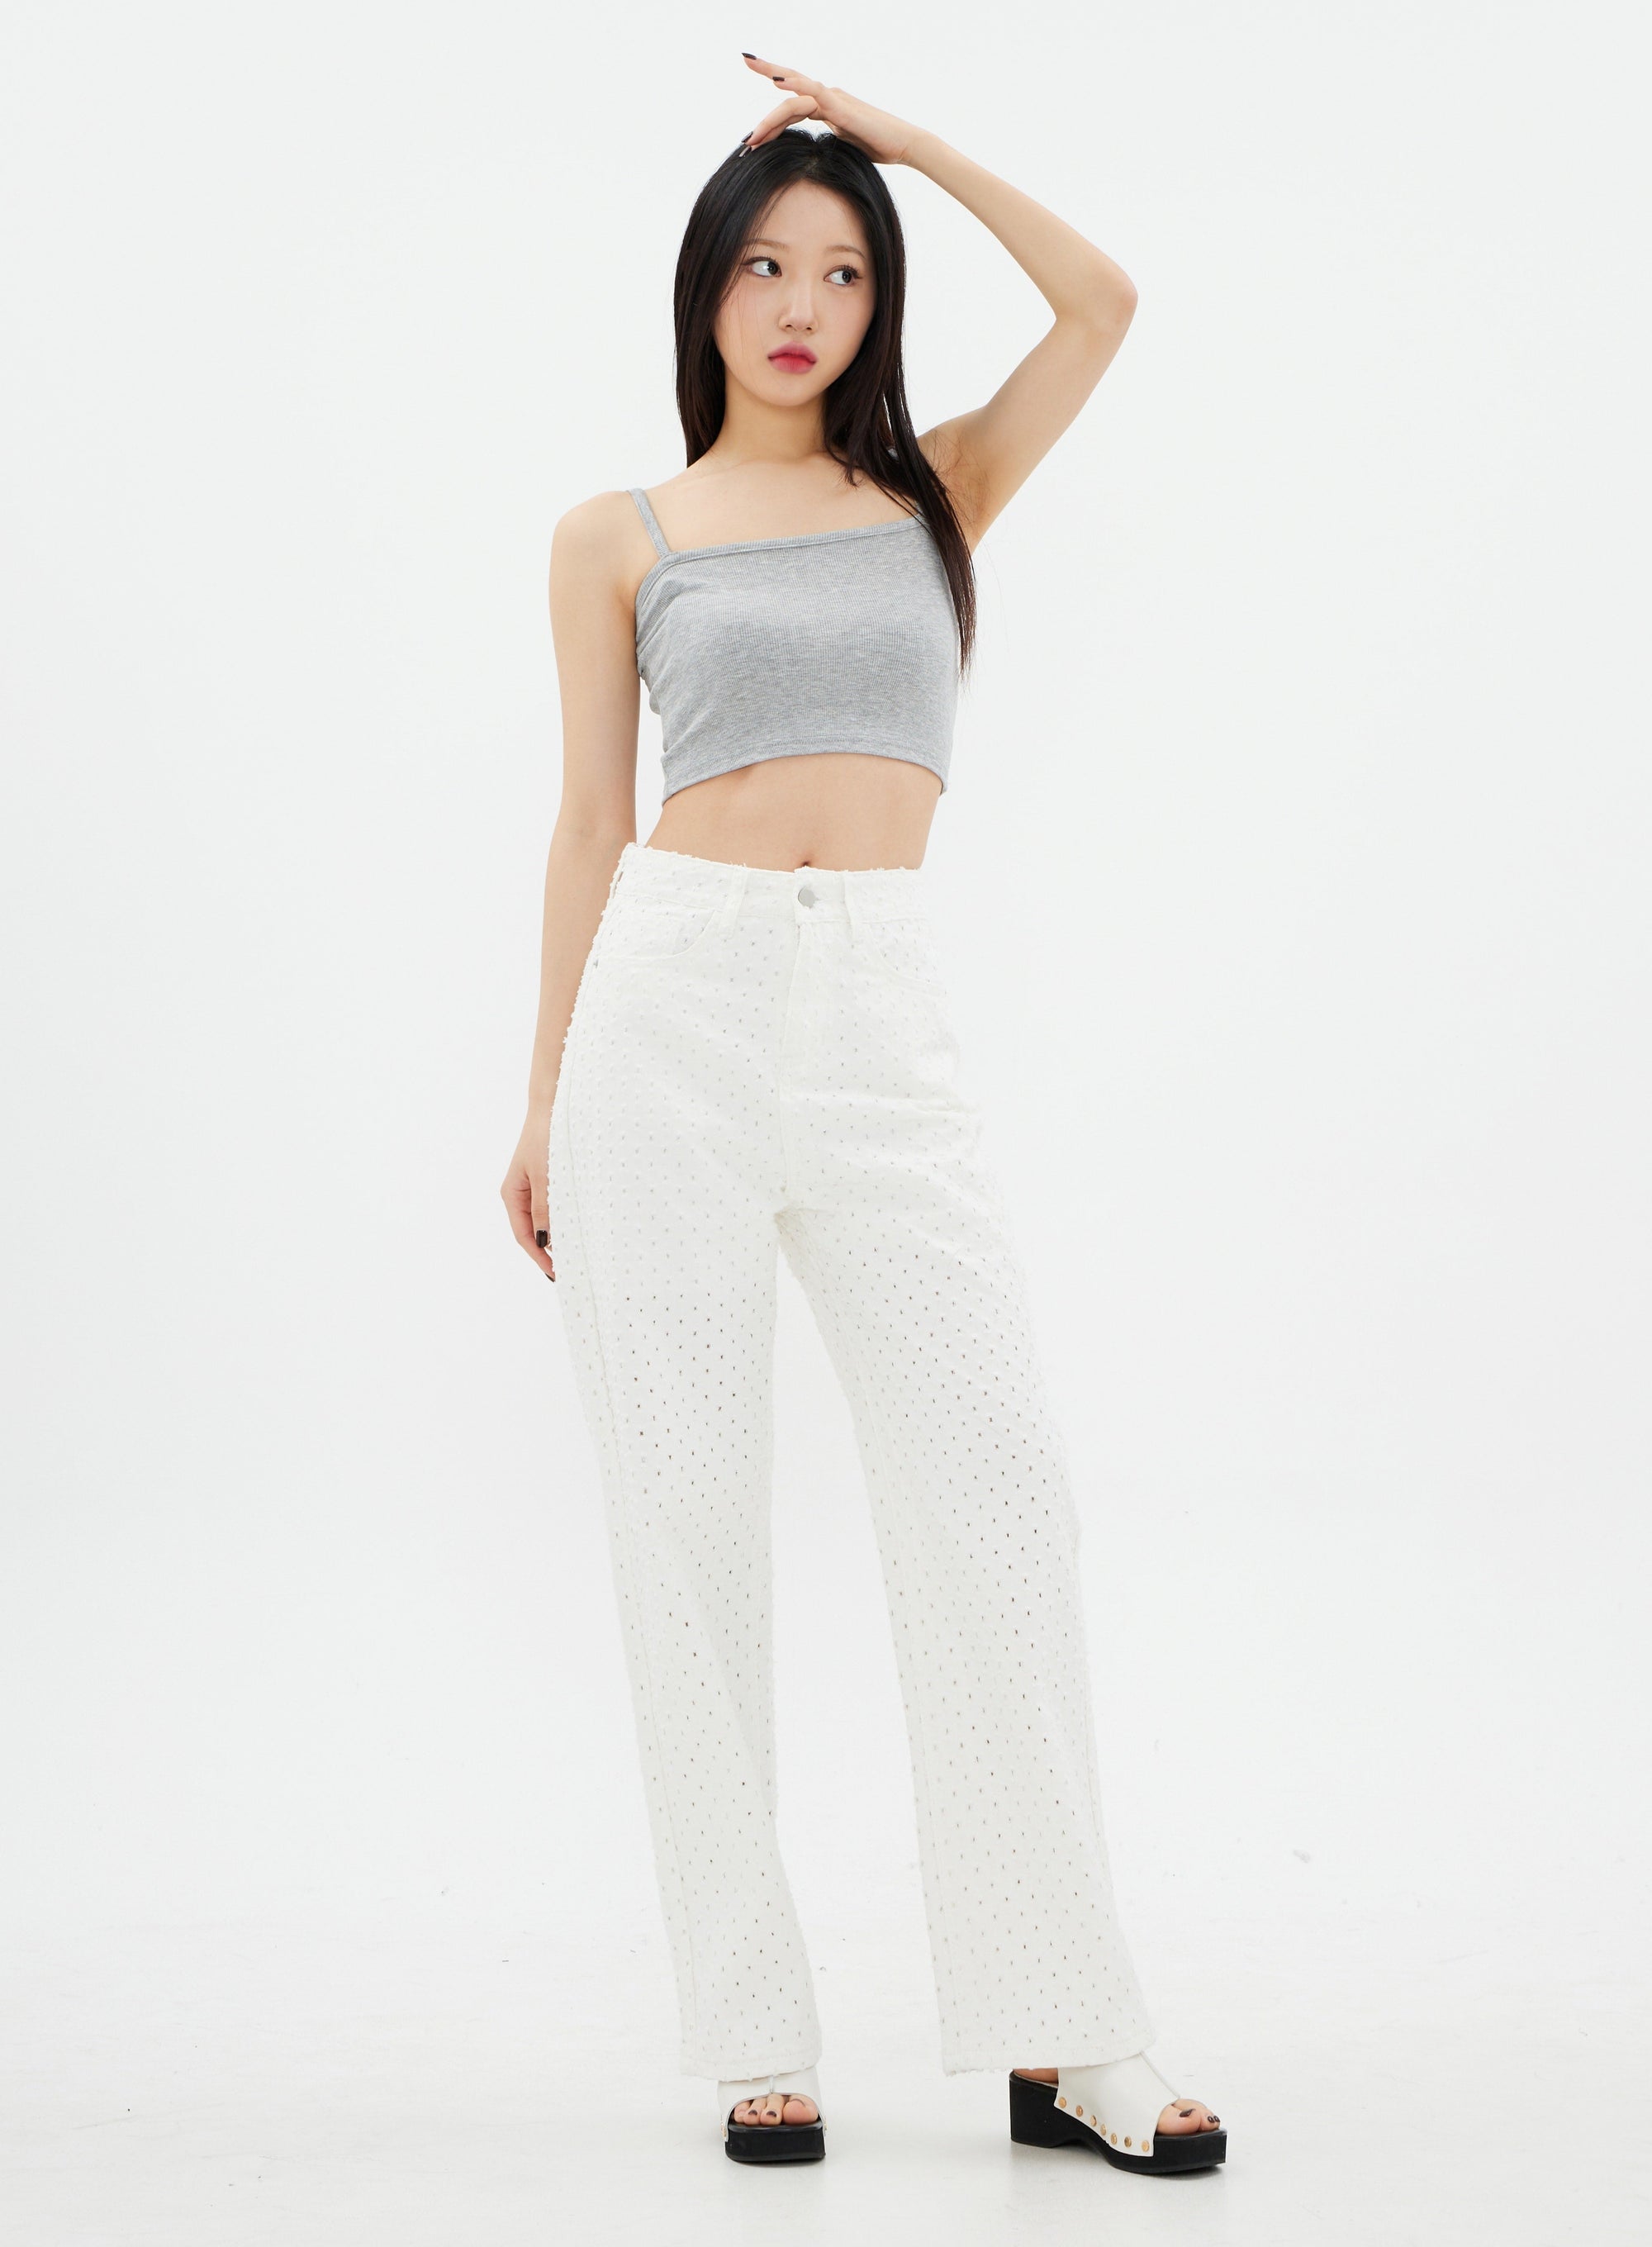 Buy White Pants for Women by ETHNICITY Online | Ajio.com